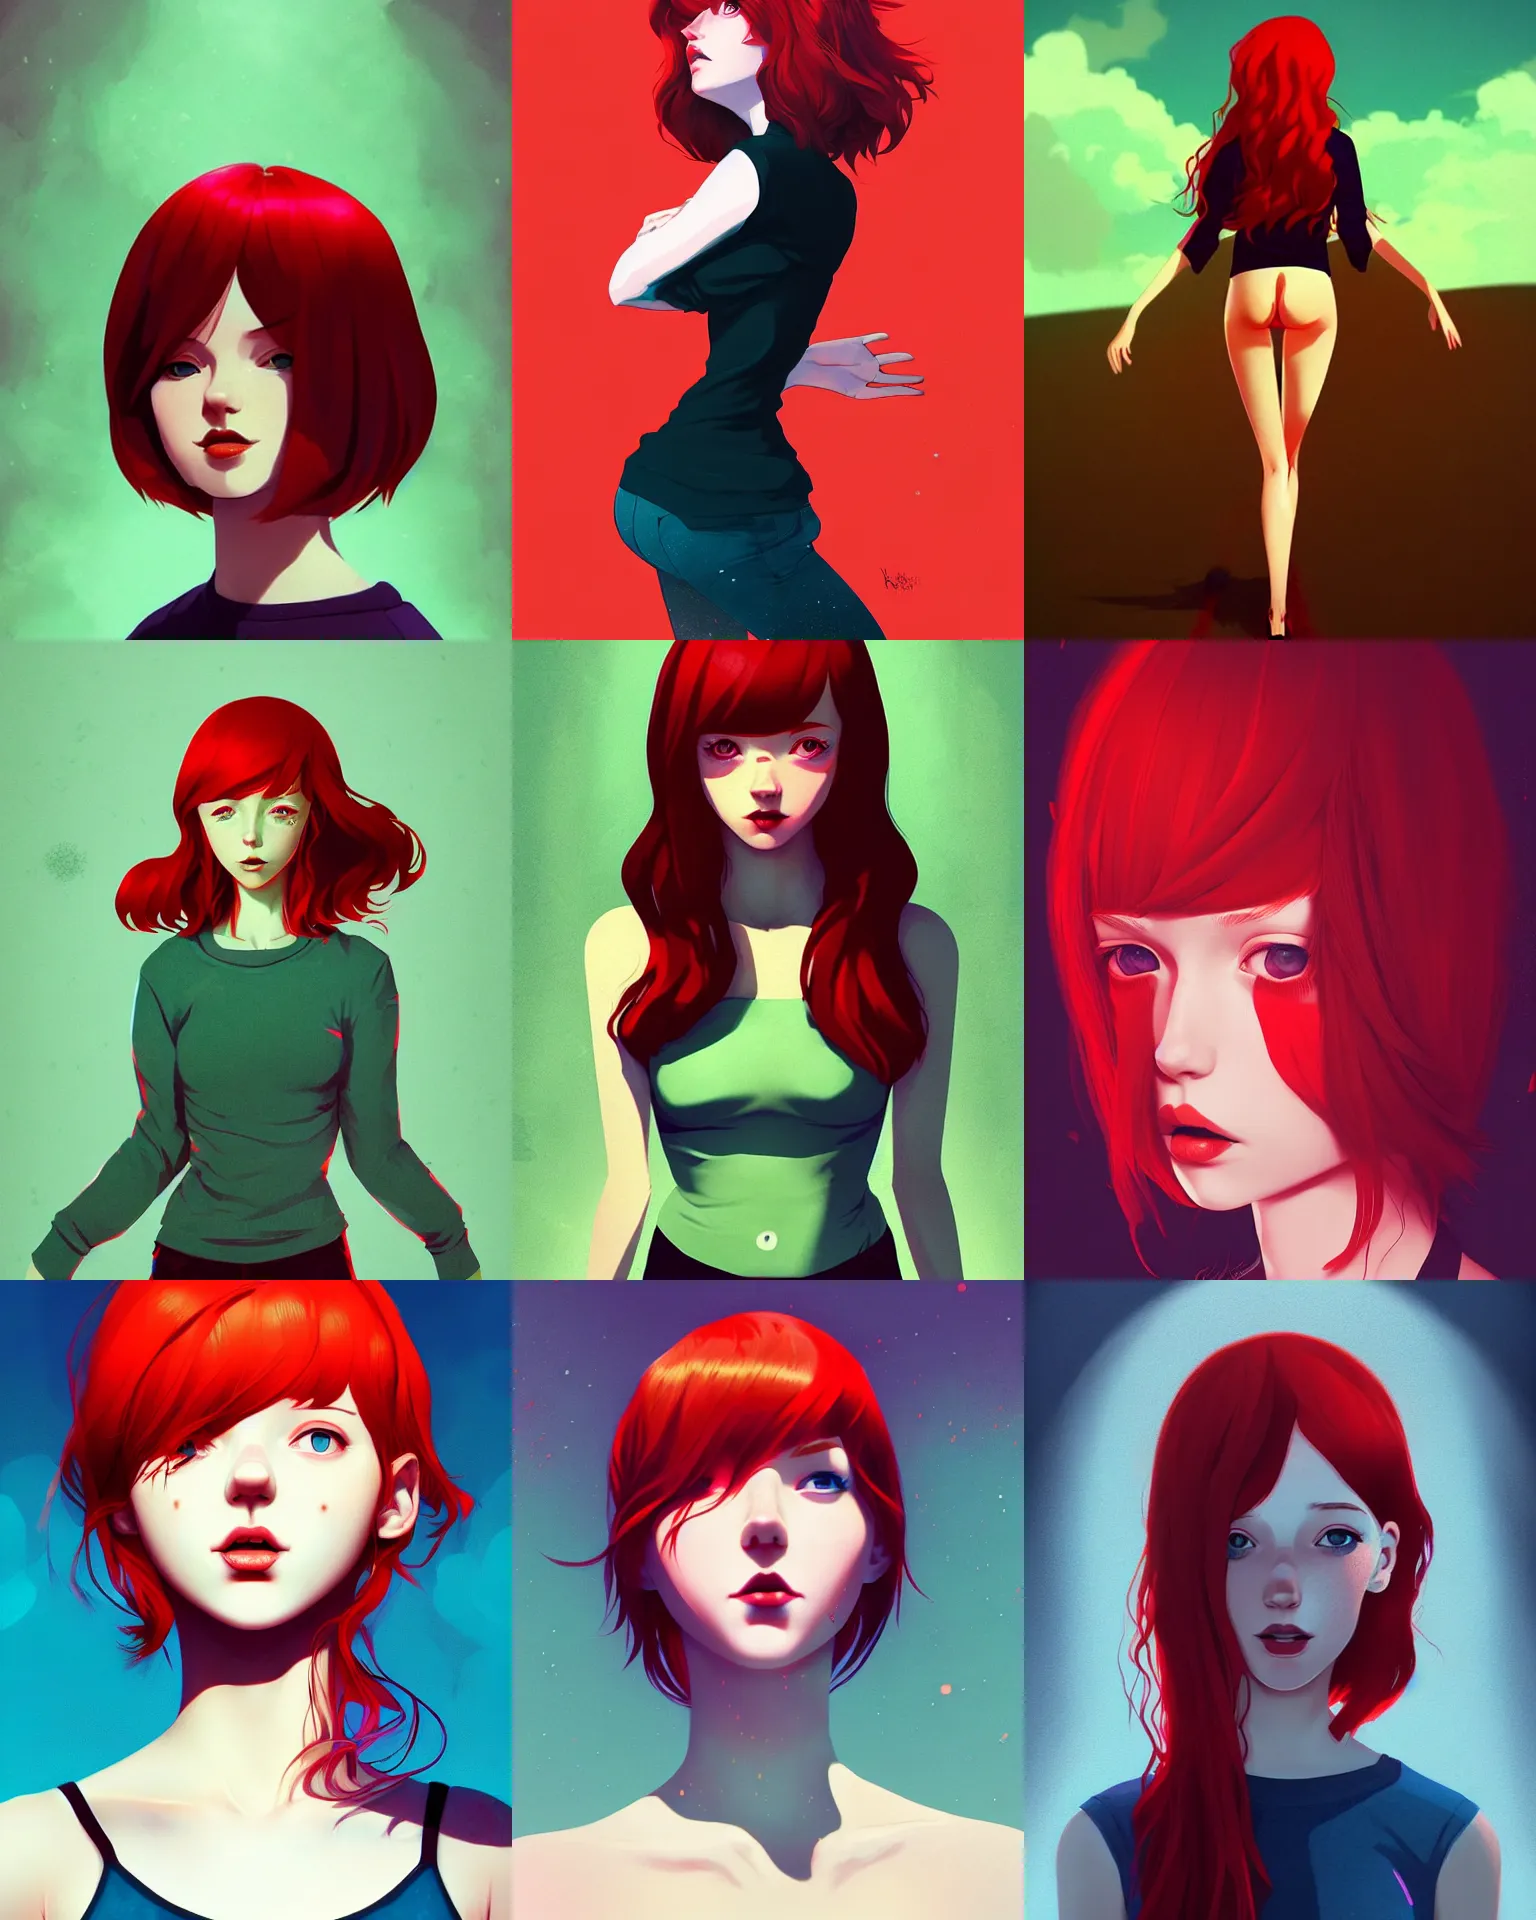 Prompt: a full body picture of a pretty!!!! woman with red hair and freckles by ilya kuvshinov, lois van baarle, psychedelic!!!!, acidwave, digital art, dramatic lighting, dramatic angle